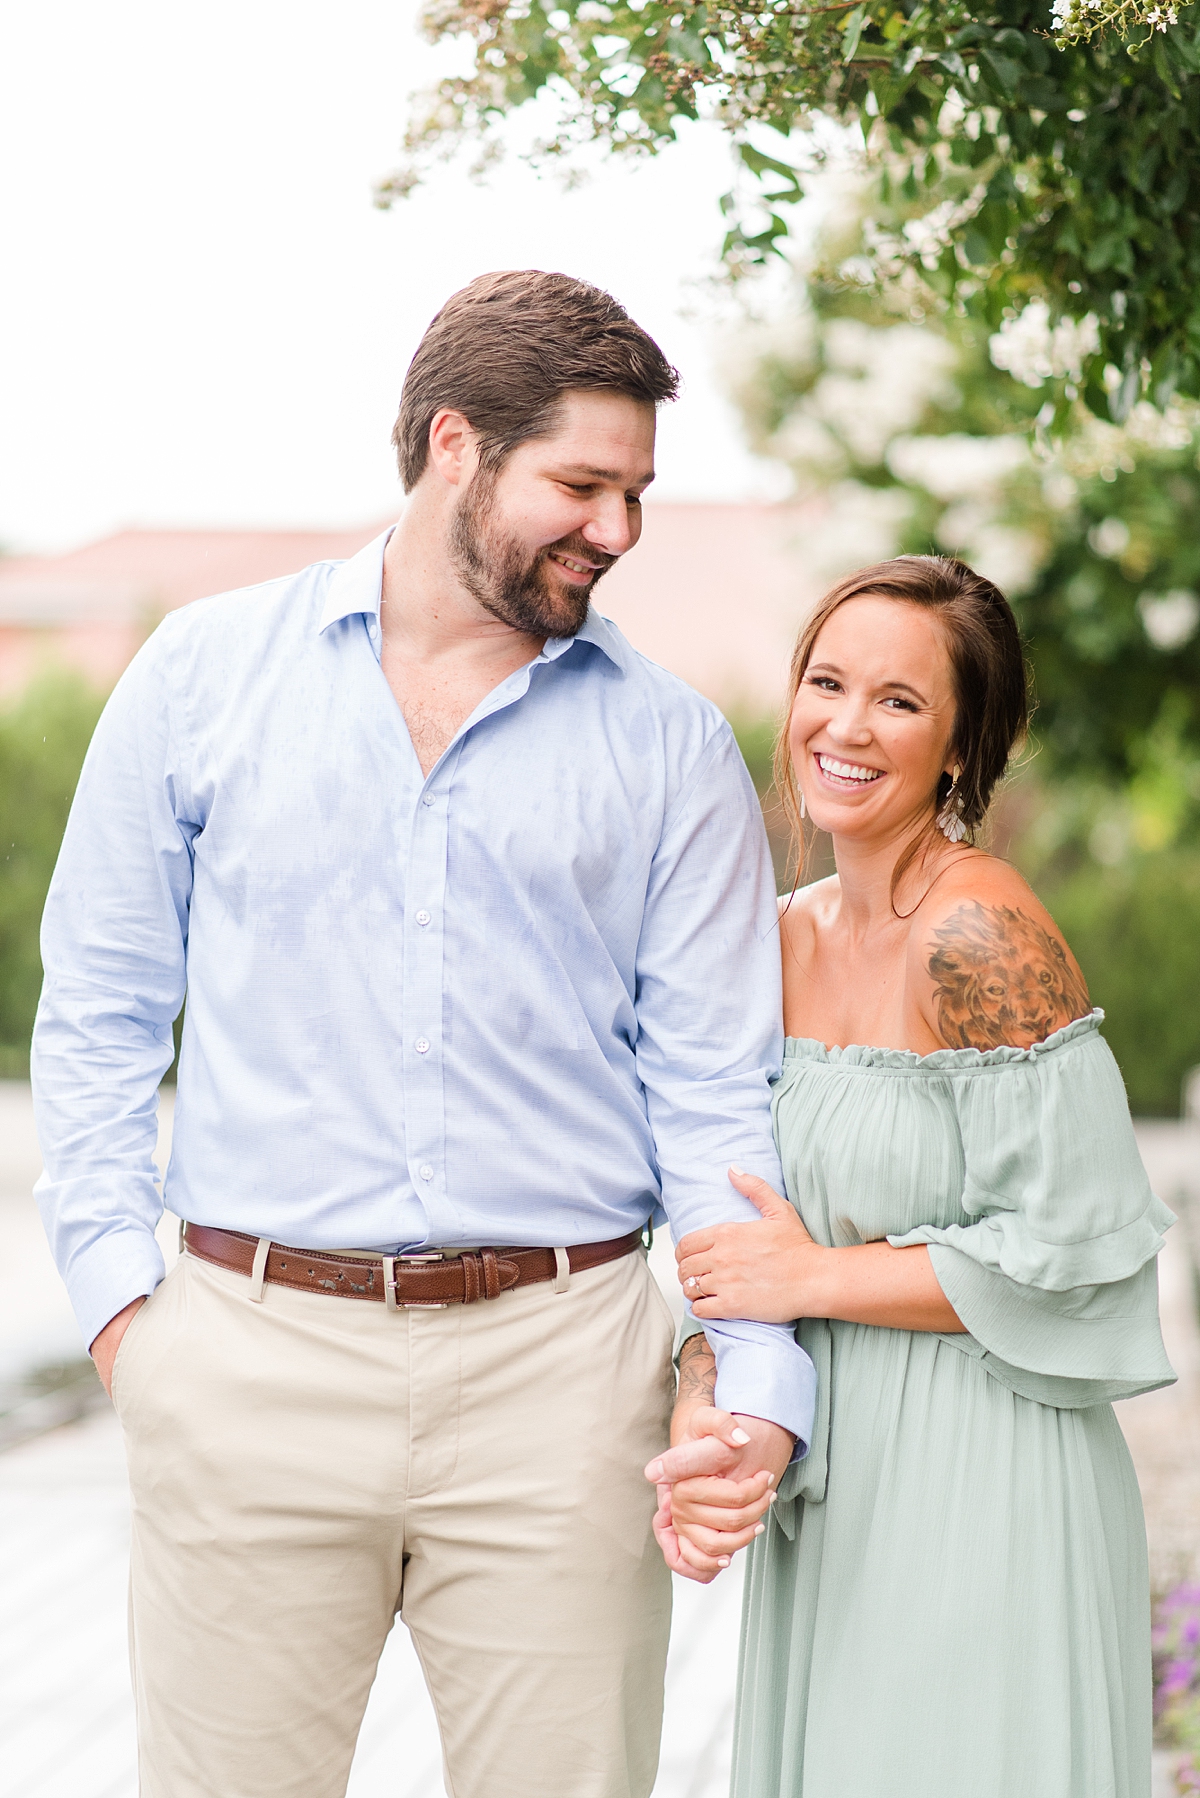 Virginia Museum of Fine Arts Garden Rainy Summer Engagement Session. Engagement Photography by Richmond Wedding Photographer Kailey Brianne Photography. 